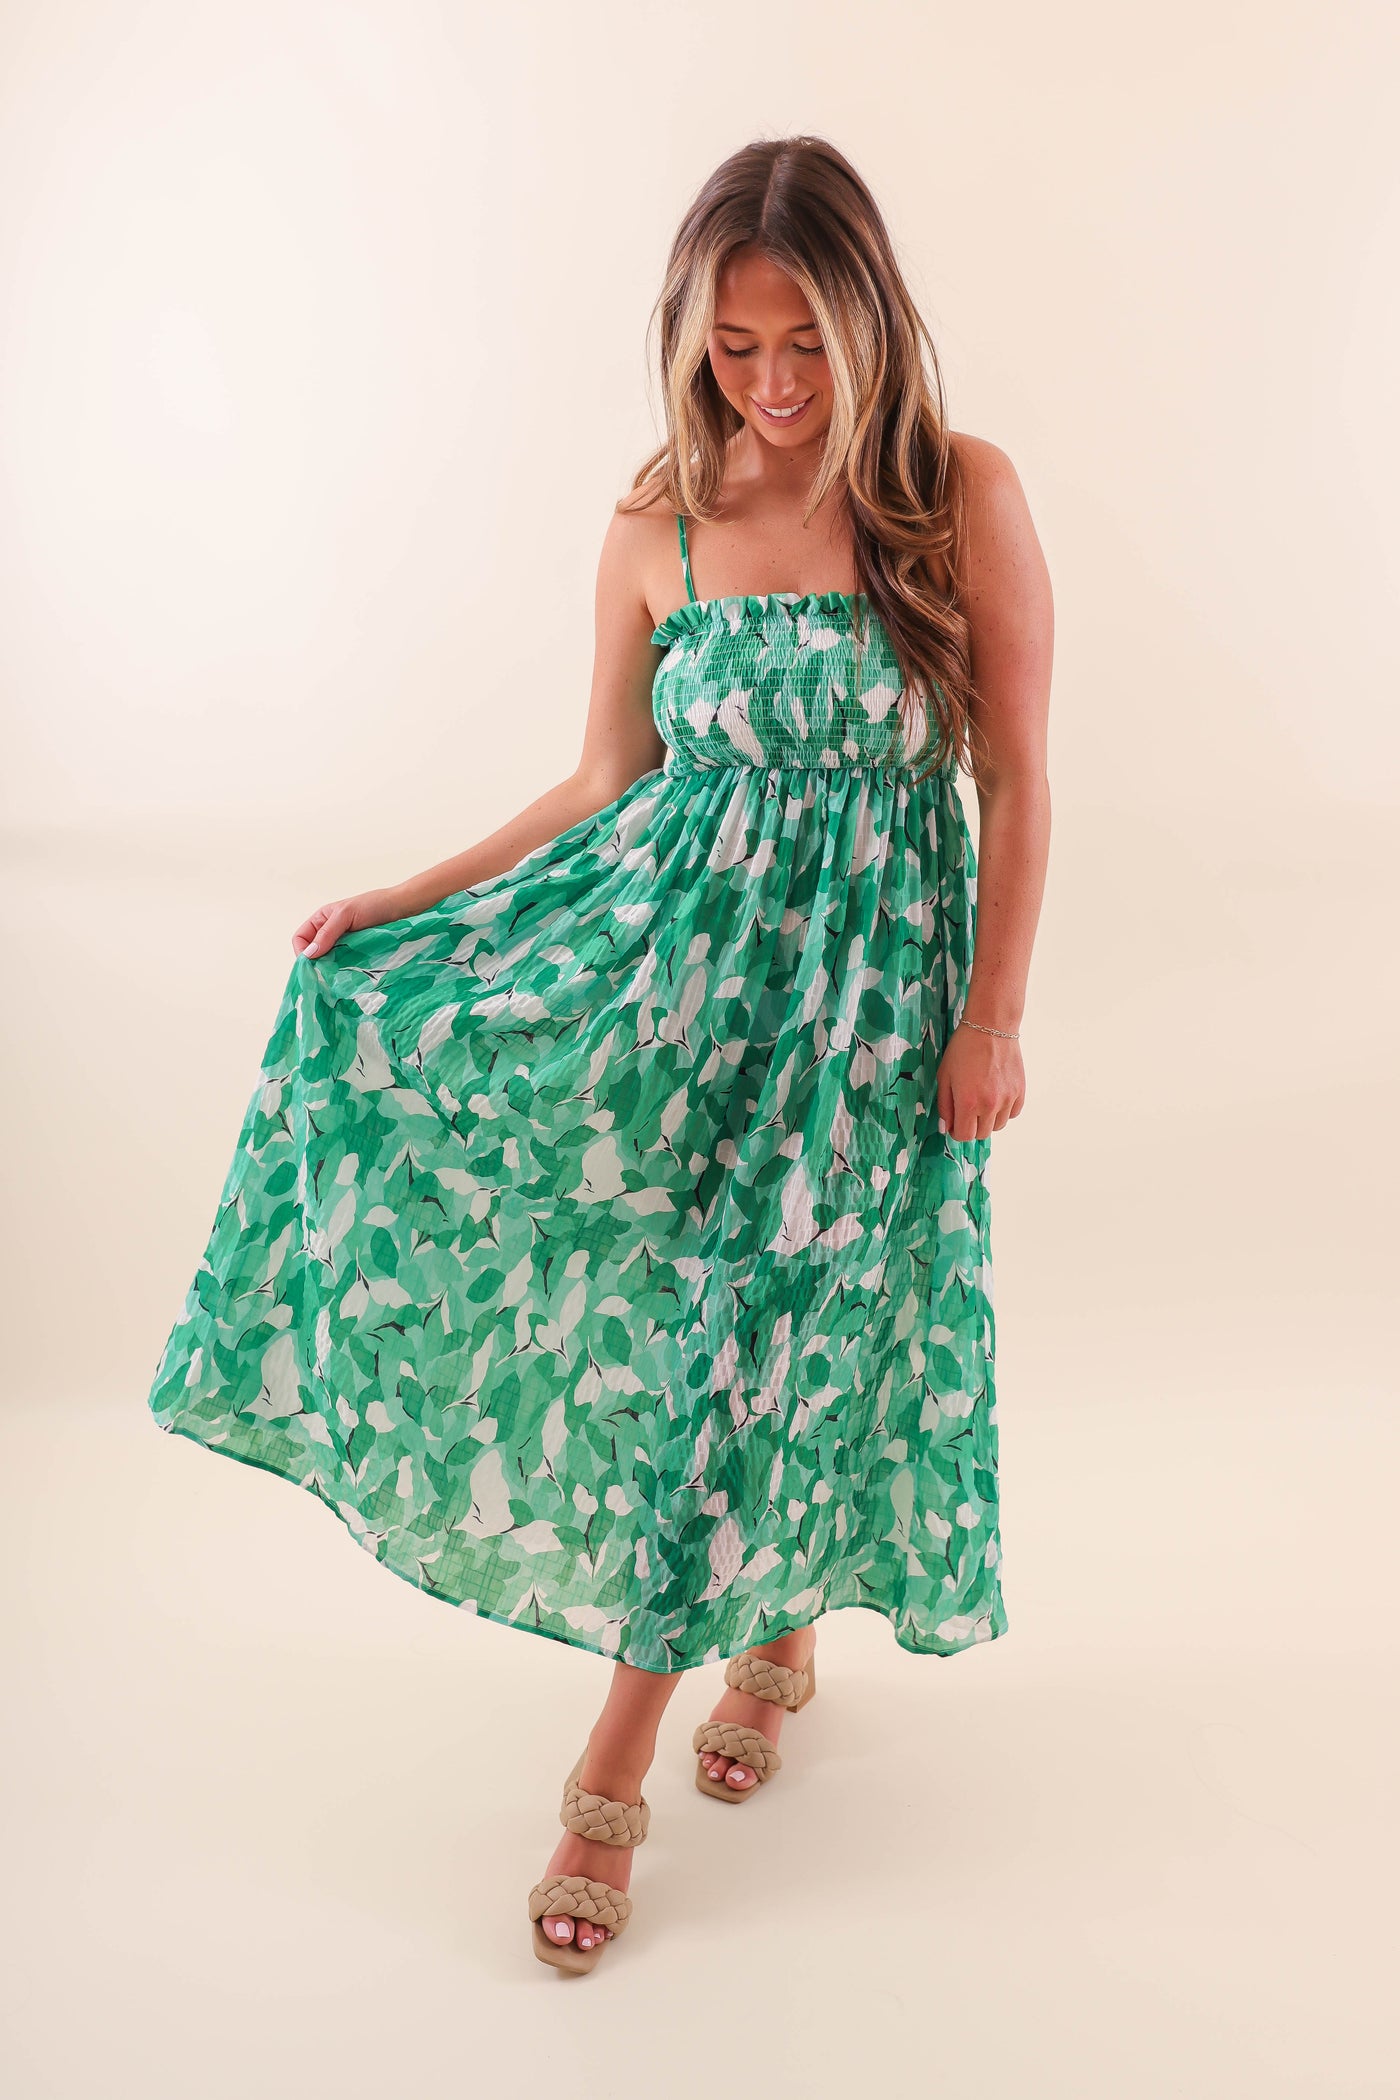 Green Leaf Midi Dress with Smocked Chest - Casual Midi Dress with Leaf Print Design